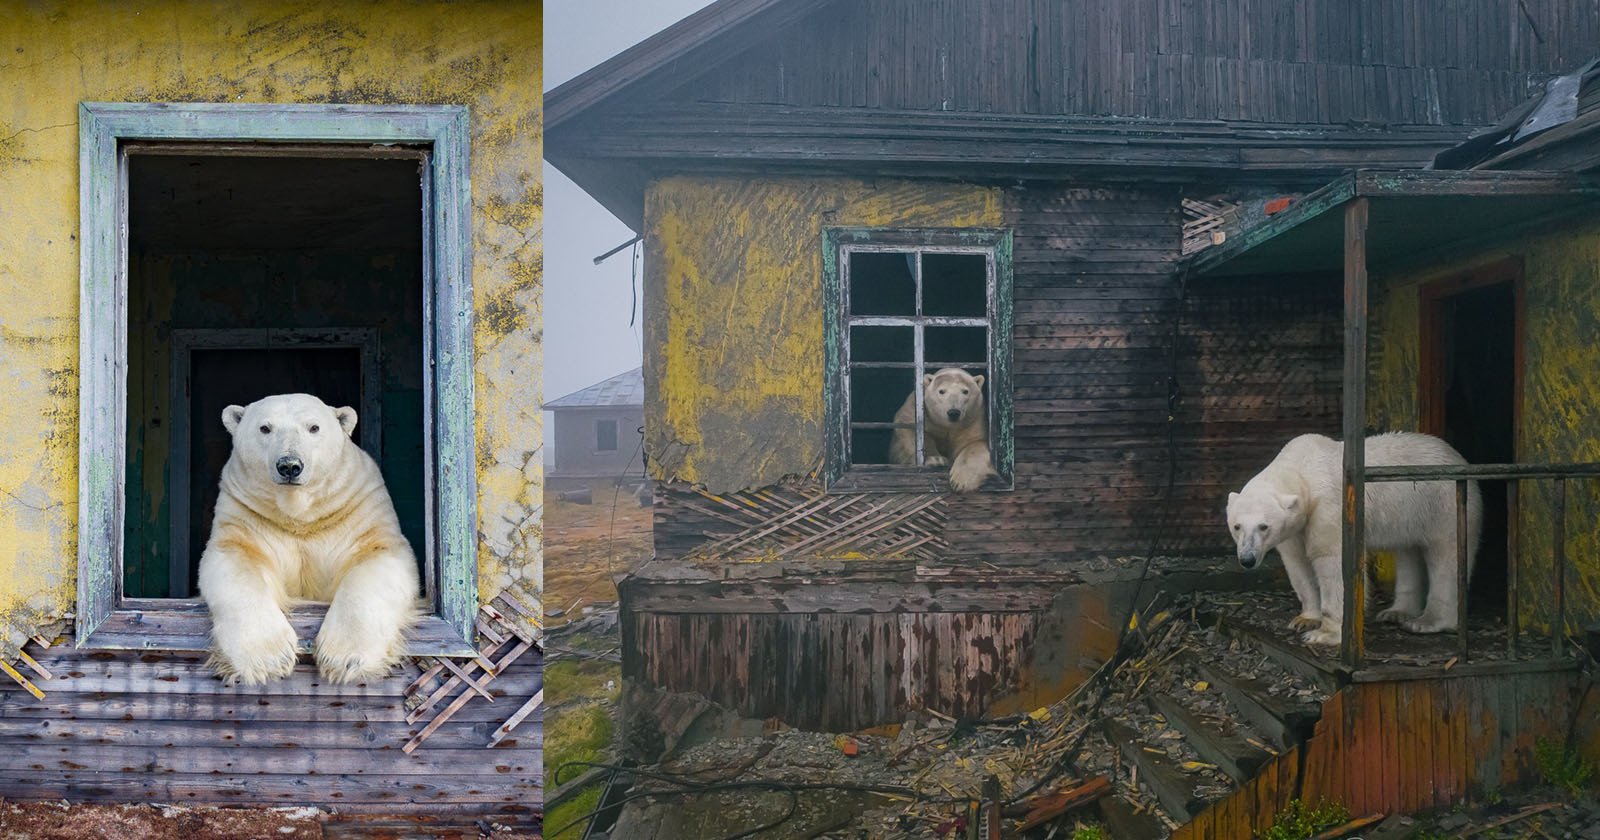  photographer finds polar bears took over abandoned 